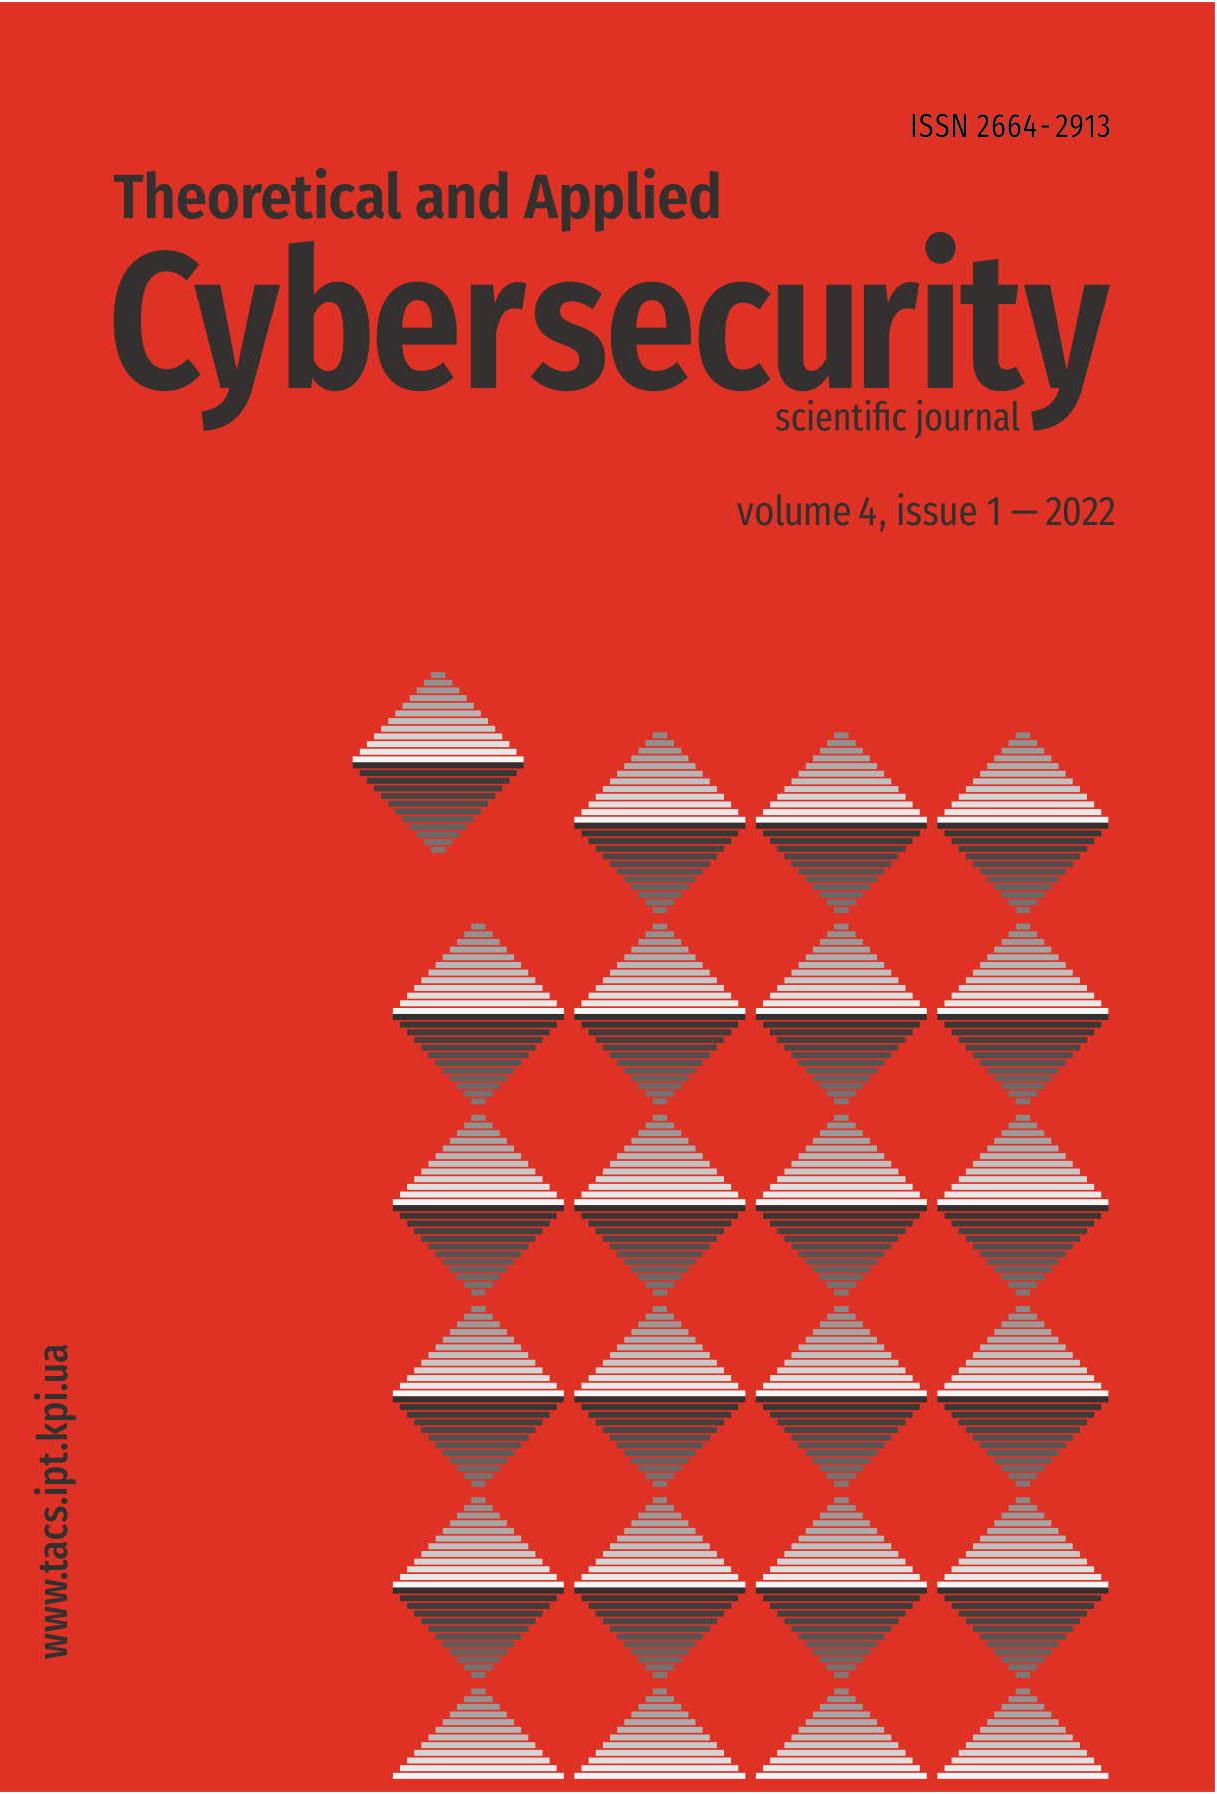 					View Vol. 4 No. 1 (2022): Theoretical And Applied Cybersecurity
				